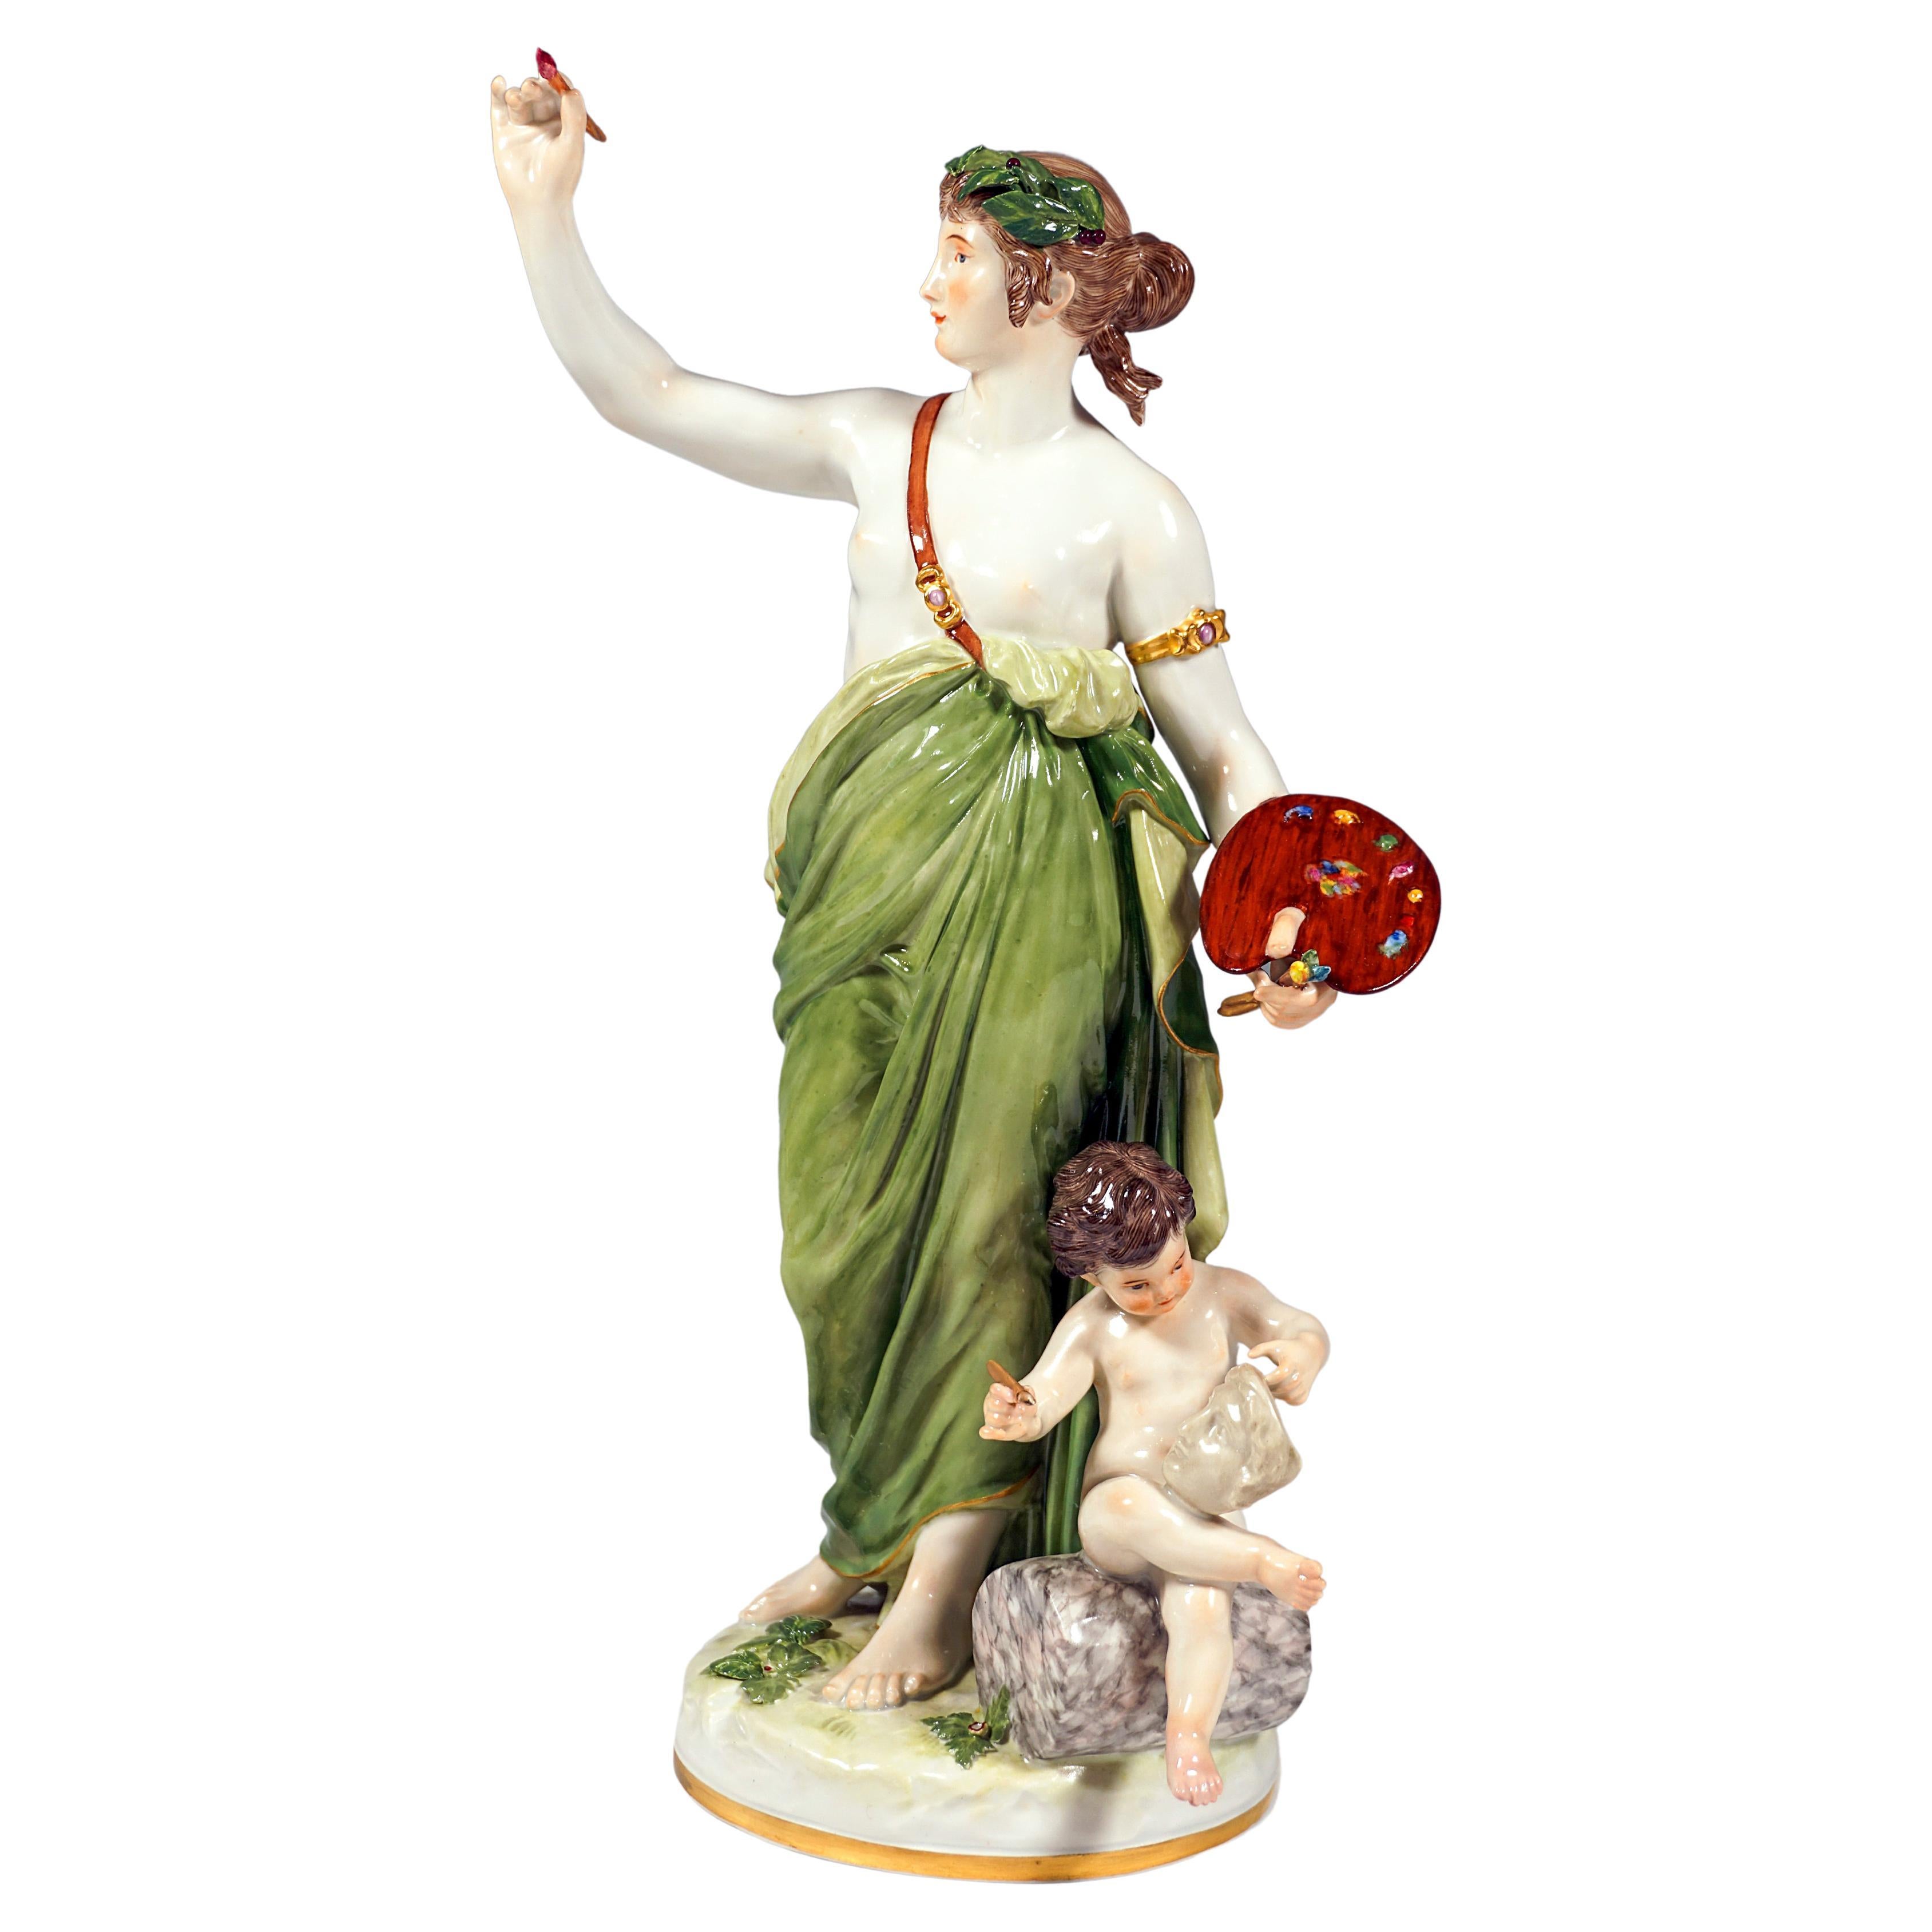 Large Meissen Figurine Allegory 'The Painting' by Johann Christian Hirt, ca 1885